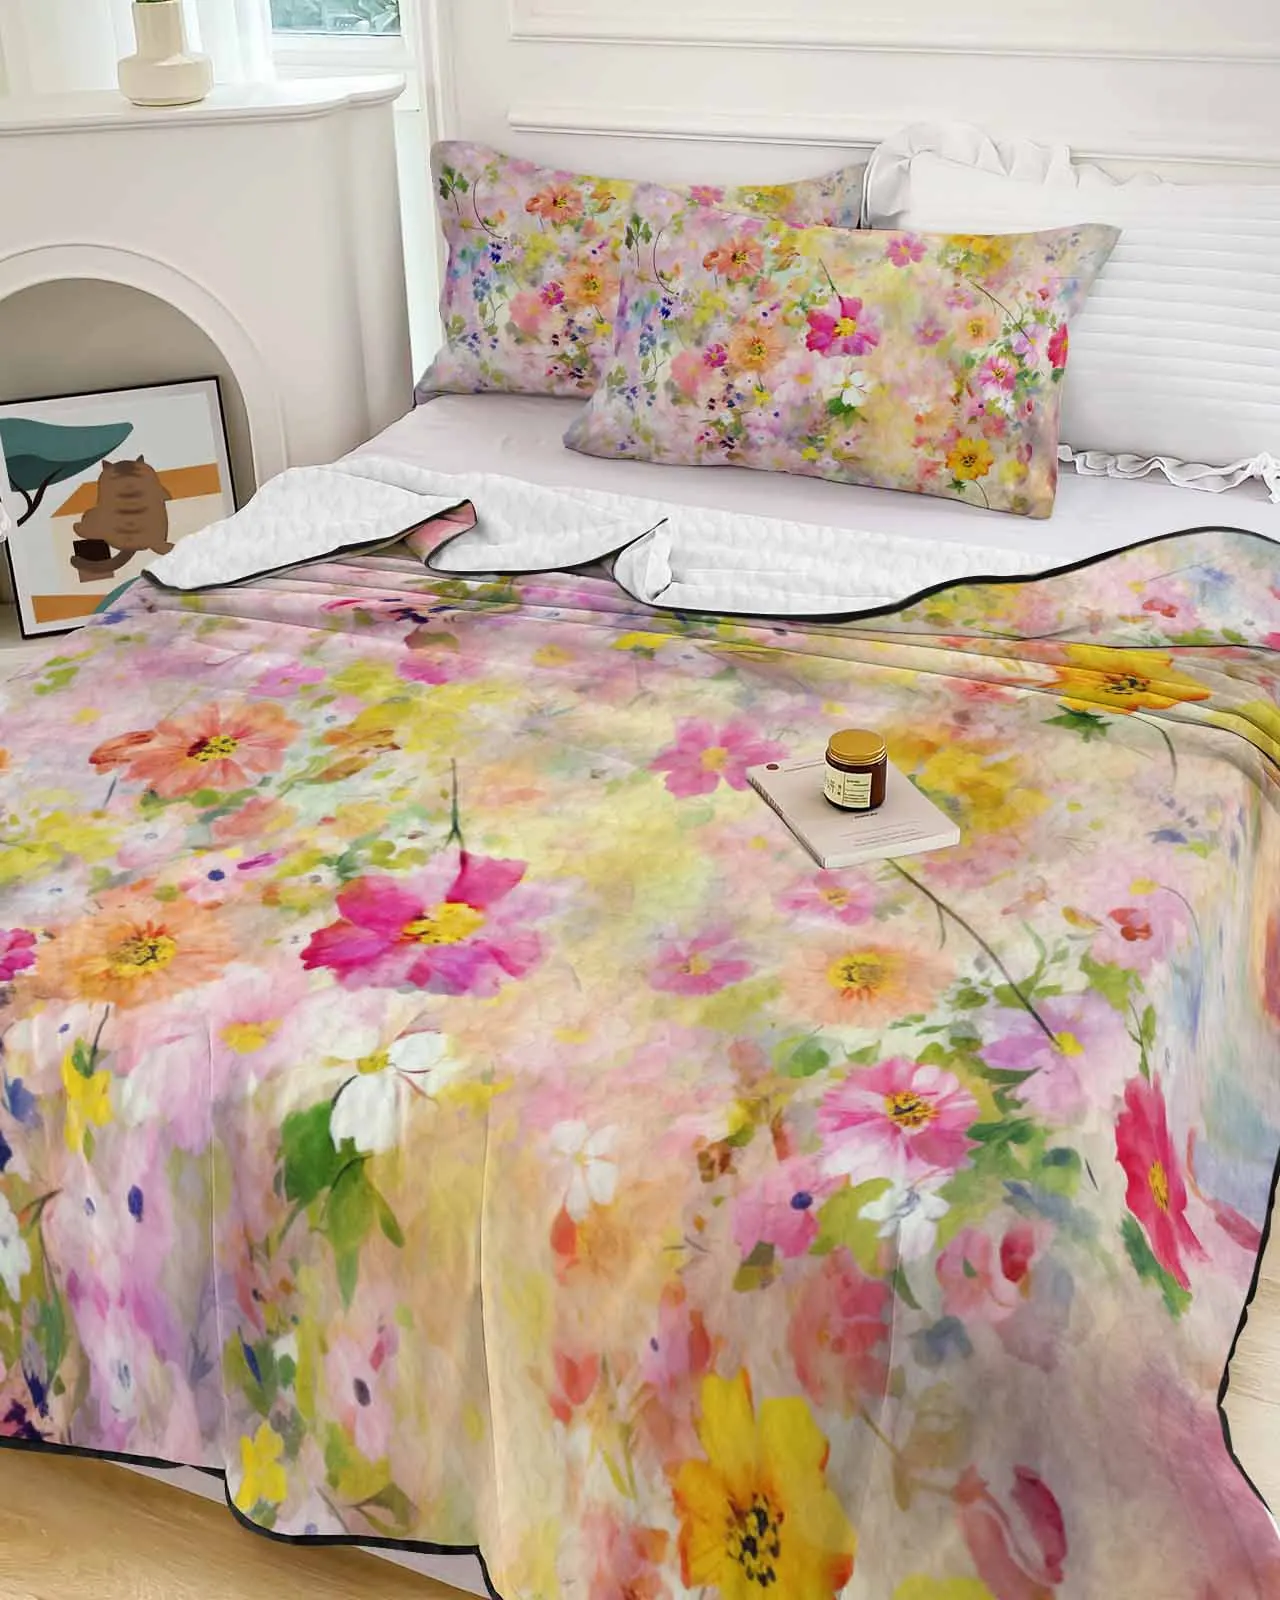 

Flower Wallpaper Daisy Cooling Blankets Air Condition Comforter Lightweight Summer Quilt for Bed Breathable Soft Thin Quilt